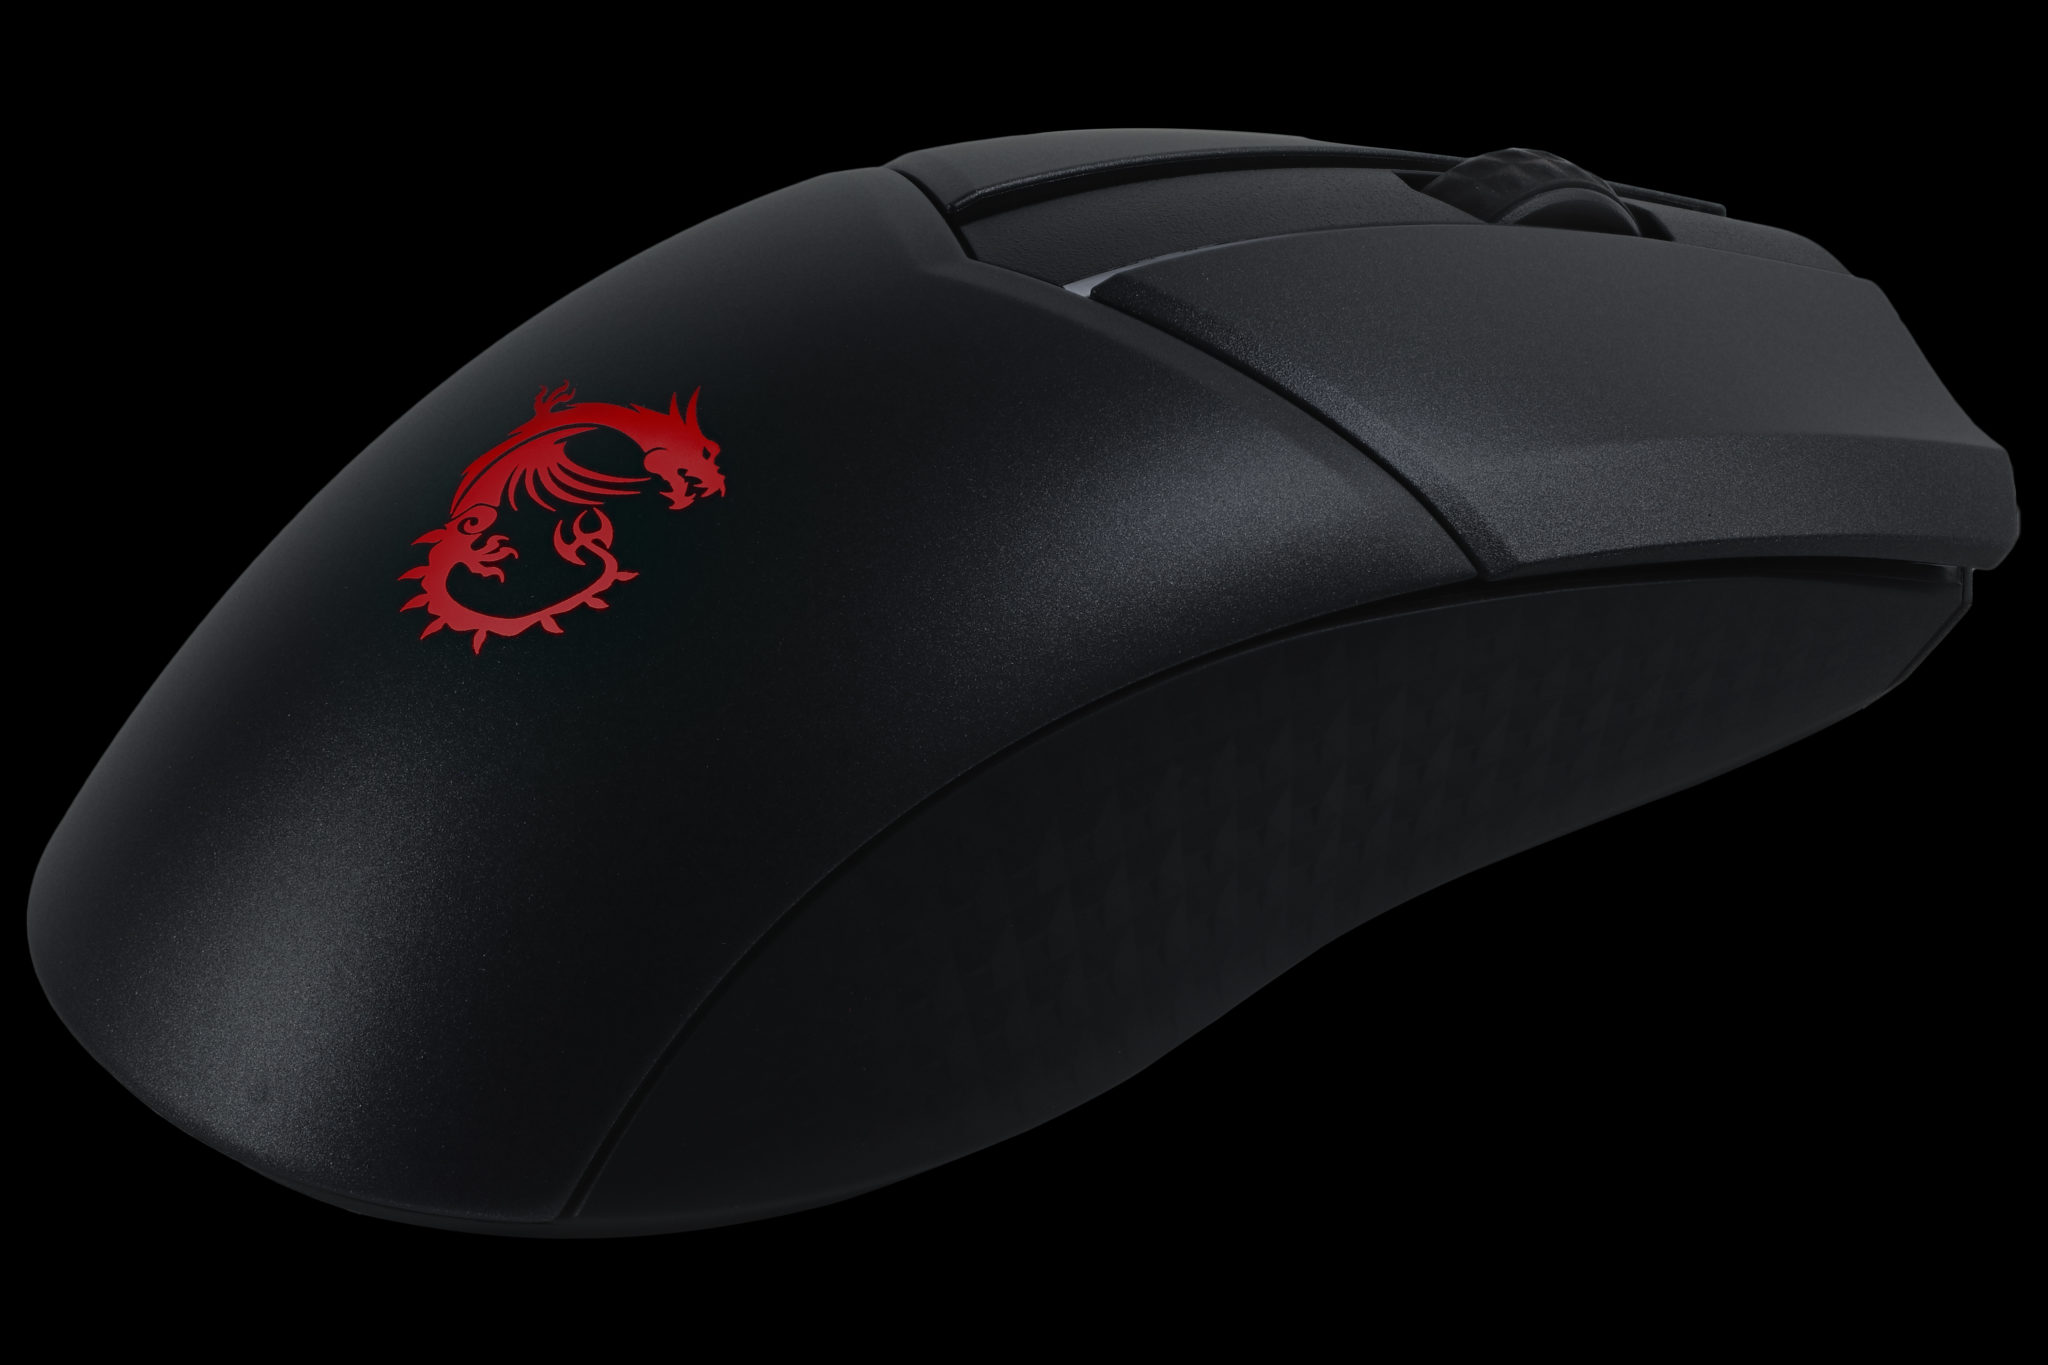 MSI CLUTCH GM41 LIGHTWEIGHT WIRELESS GAMING MOUSE